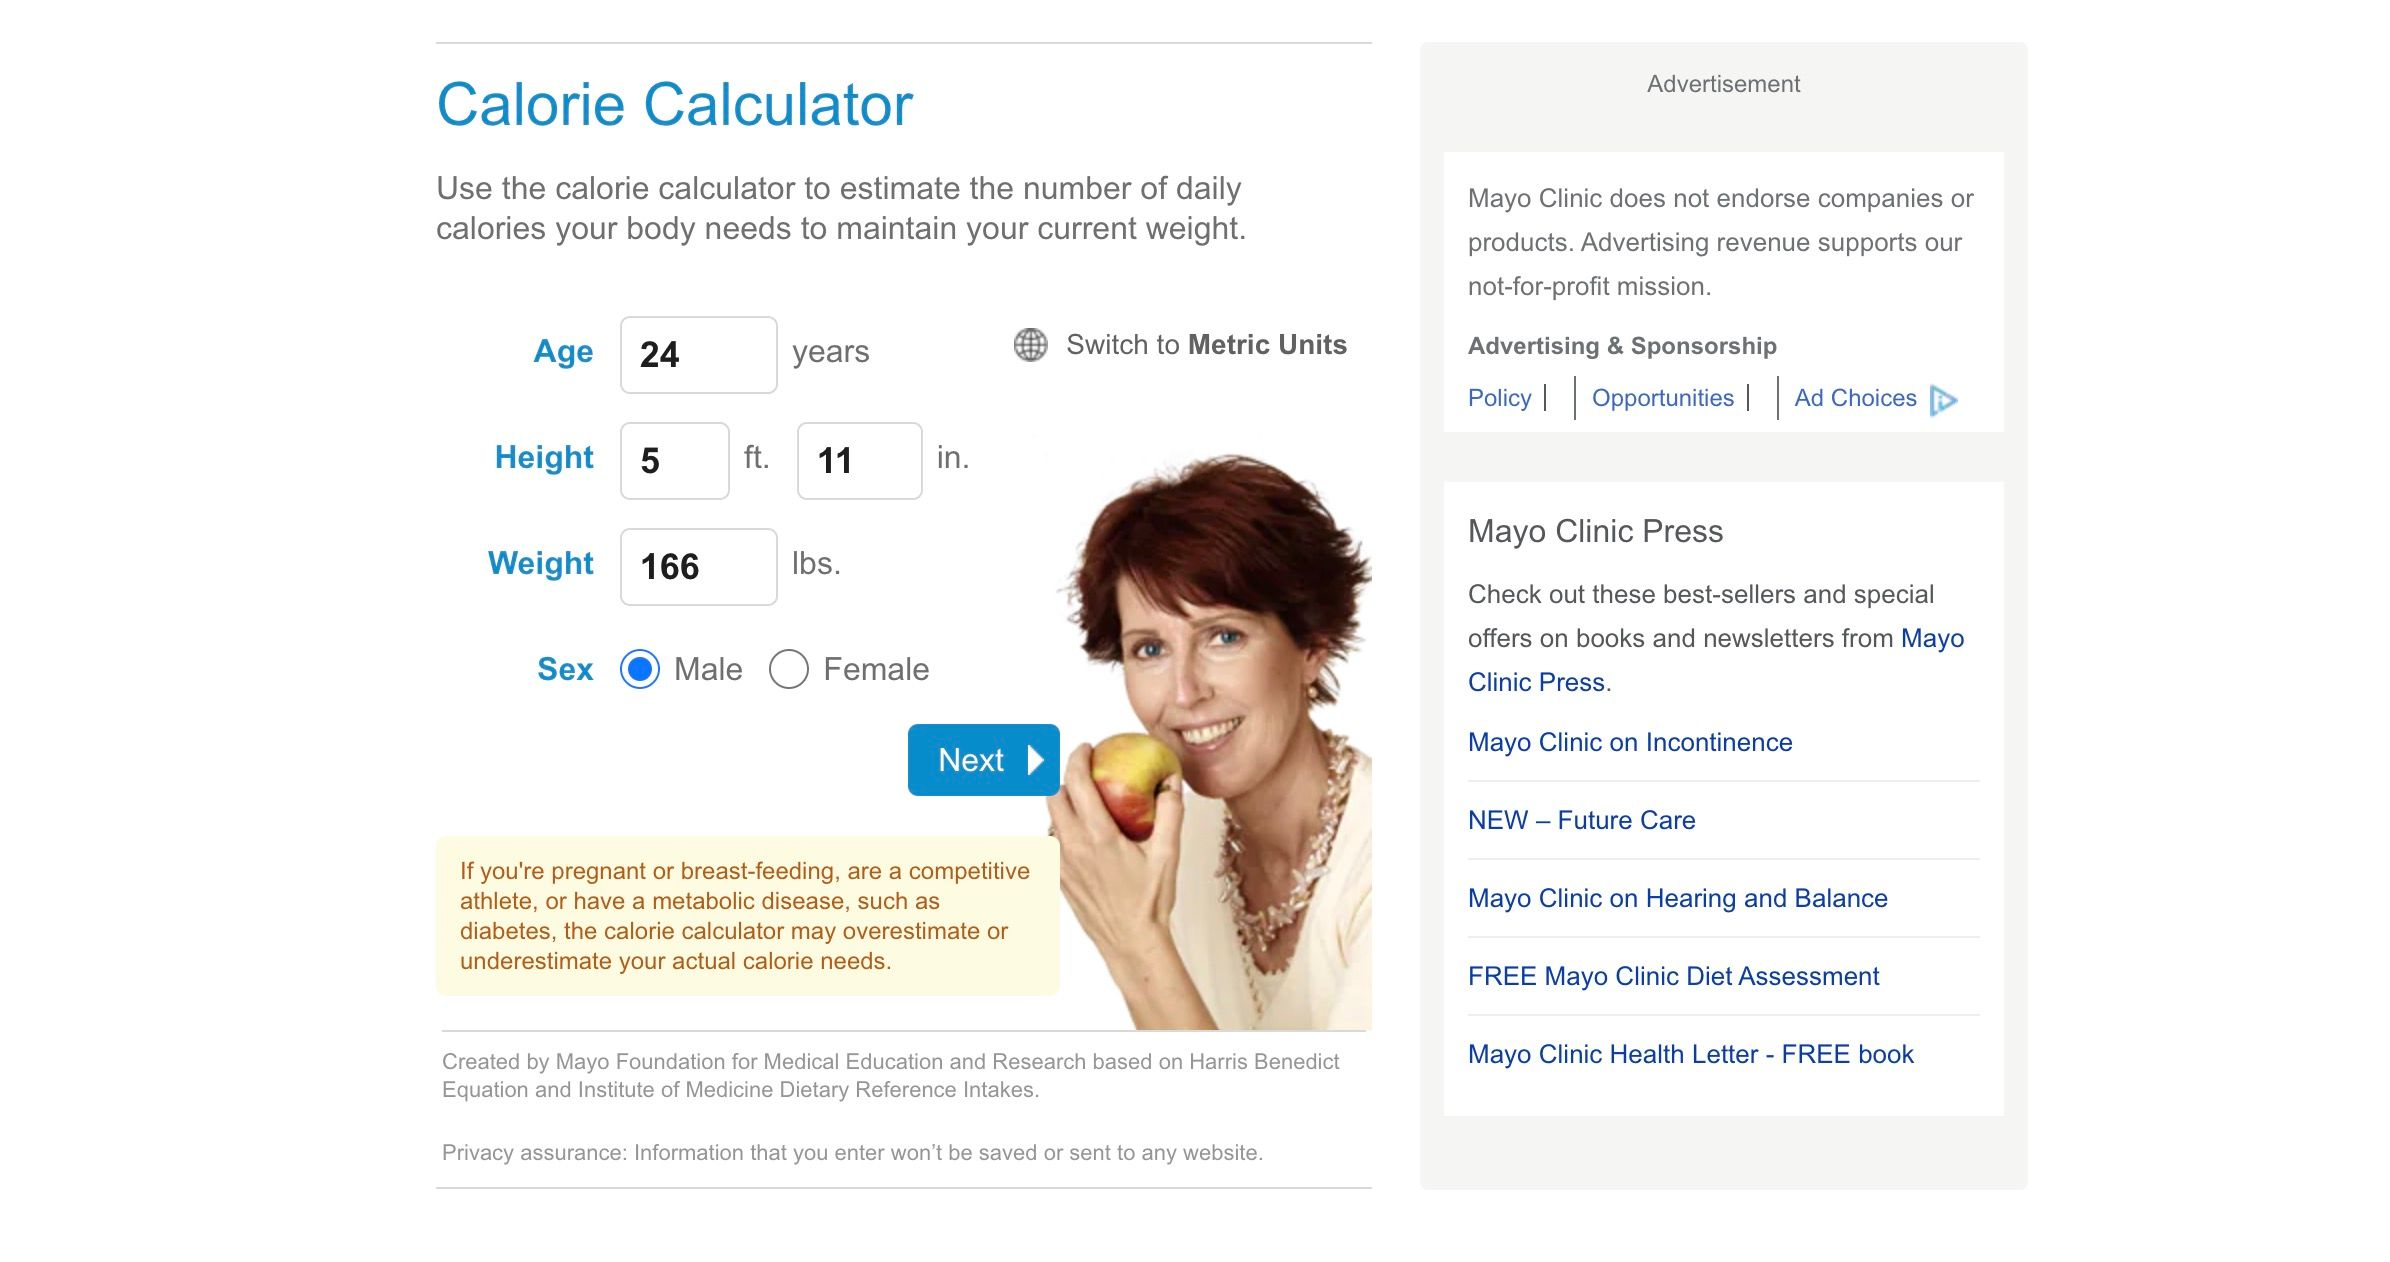 Calorie calculator asking you to input personal information